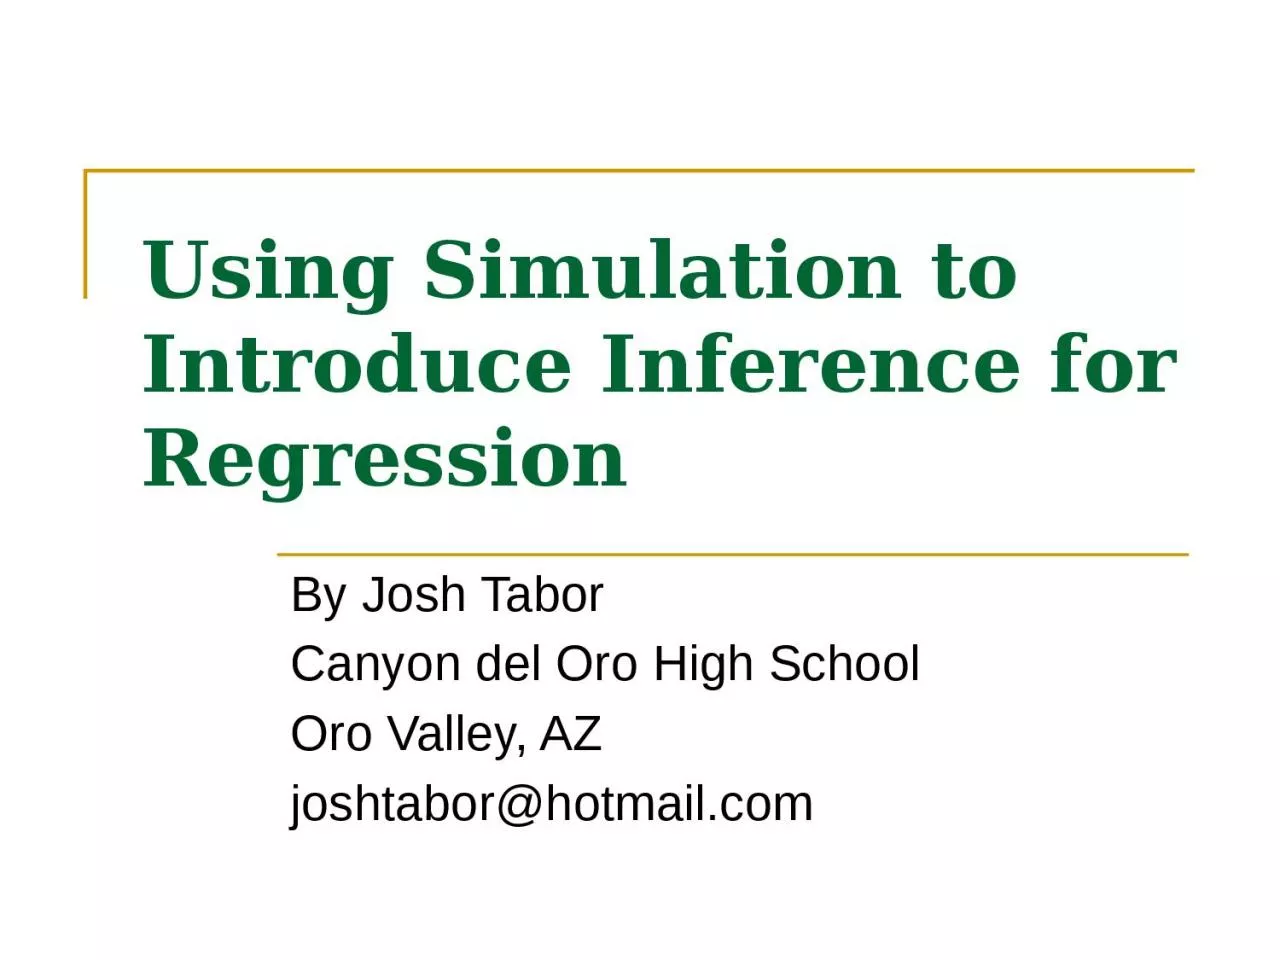 Using Simulation to Introduce Inference for Regression